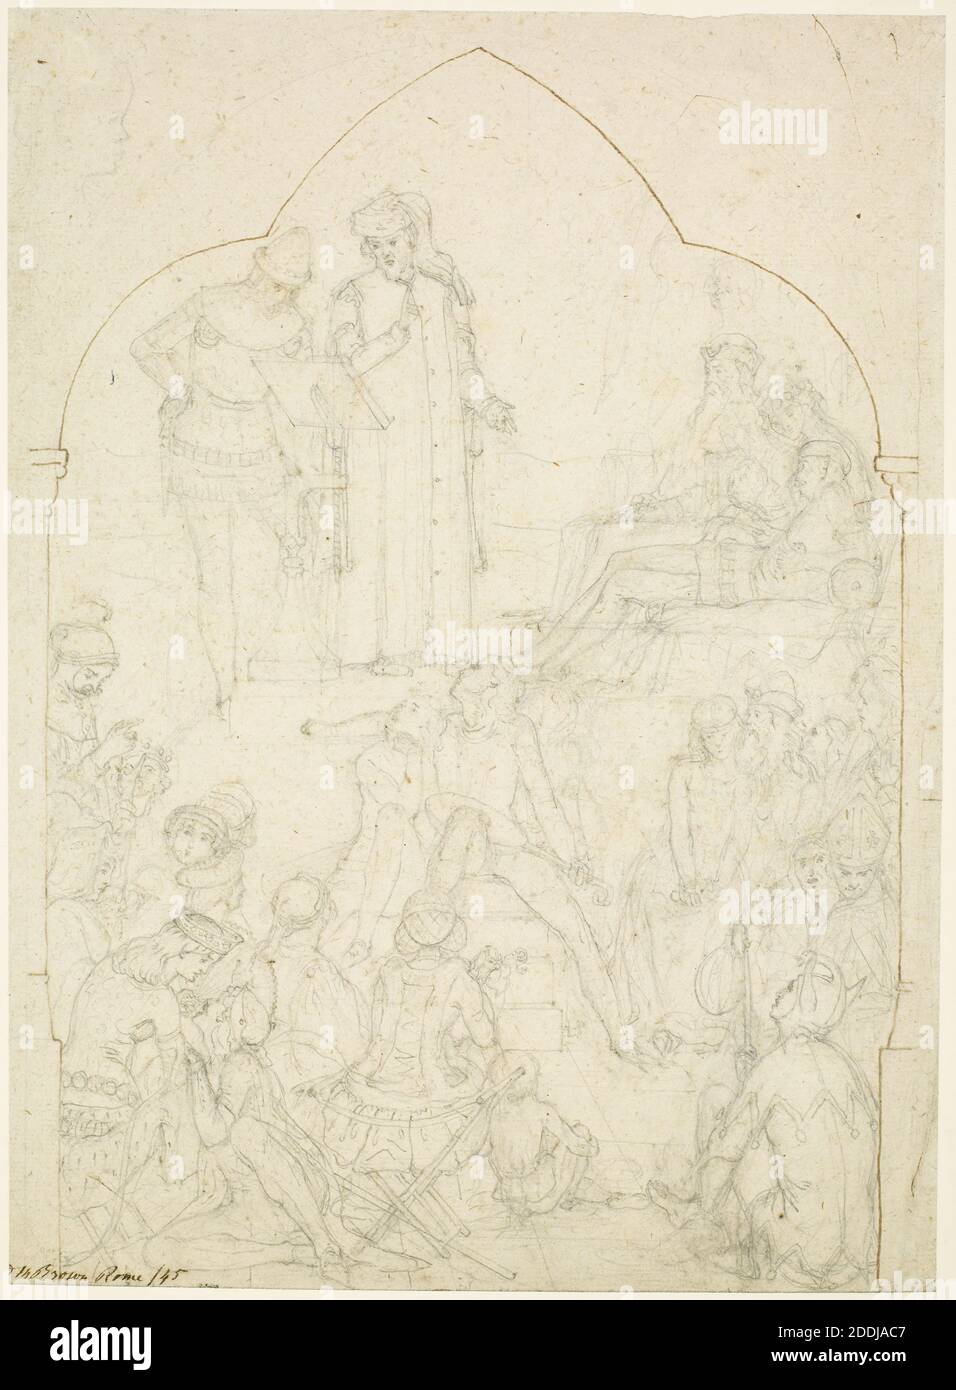 Chaucer at the Court of Edward III, Early compositional Study, 1845, Geoffrey Chaucer stands at the top, on the left, reading. on the left standing next to Chaucer is John of Gaunt in armour. Seated on the right with a beard is King Edward III and below him reclining is the Black Prince. At the bottom are various other figures in medieval dress including a jester at the front on the extreme right. the scene is enclosed in a trefoil arch and above this is a faint head in profile to the right. Artist: Ford Madox Brown, Pencil With Brown Ink On Paper, 19th CenturyPre-Raphaelite Stock Photo